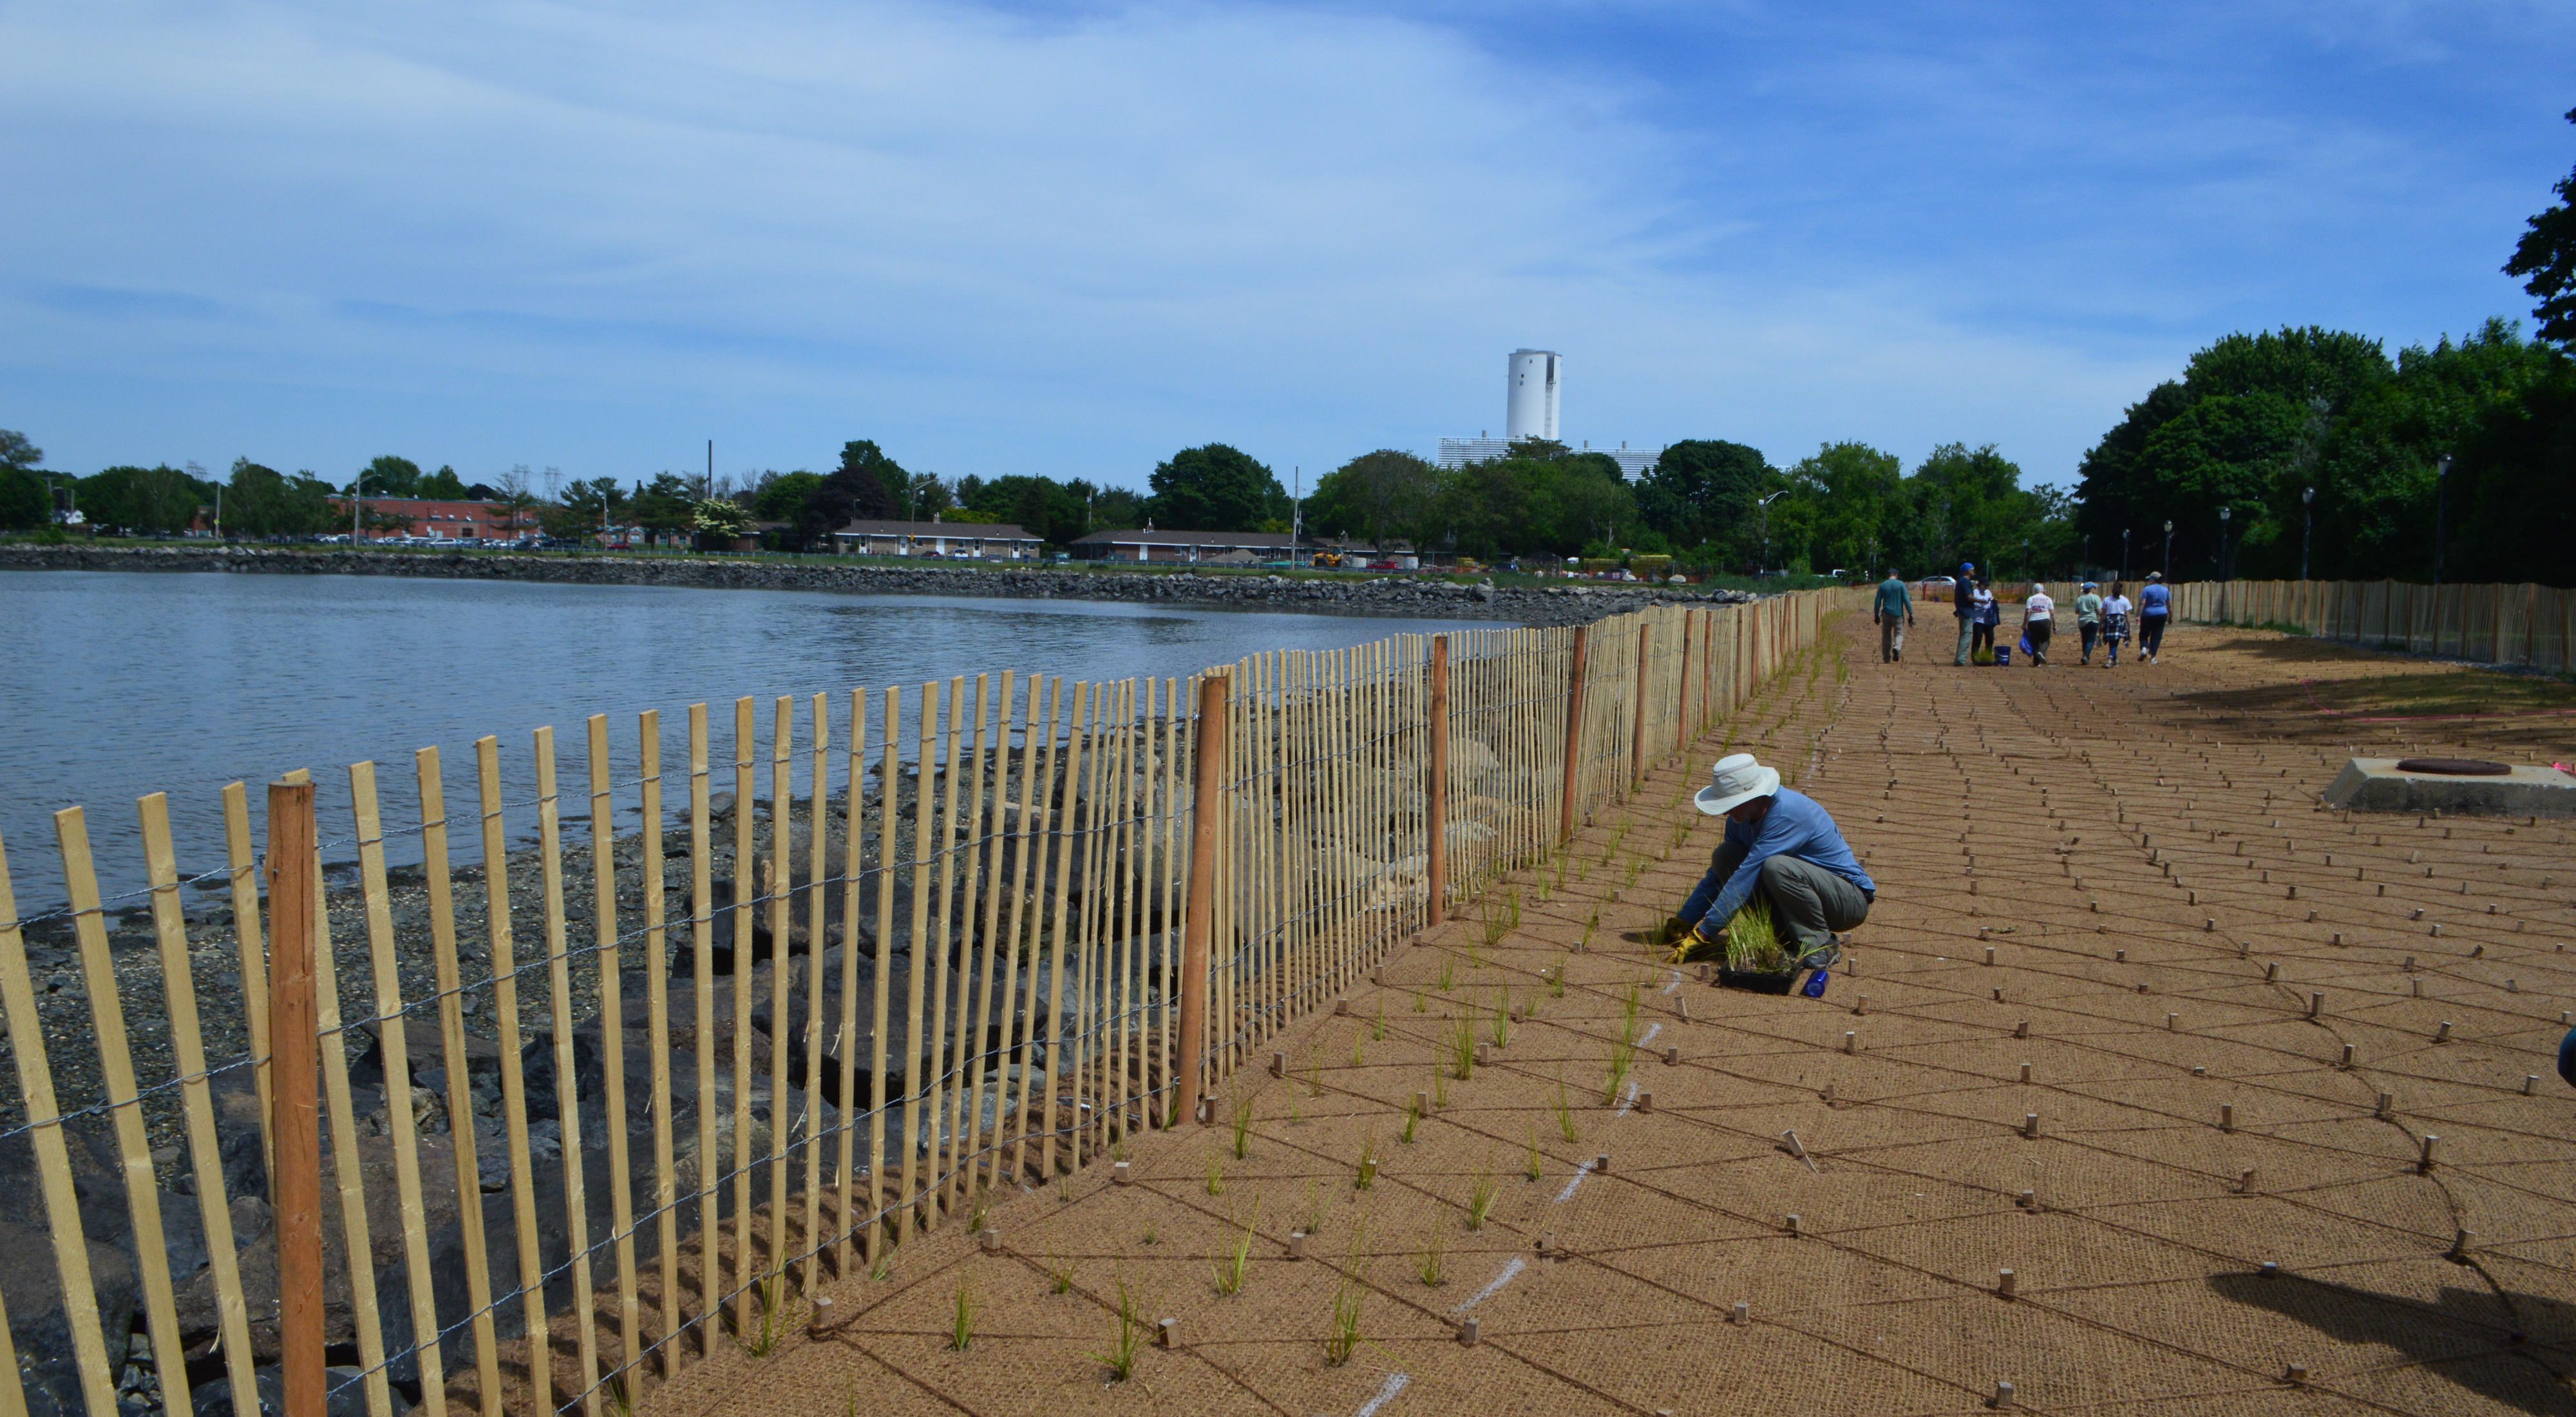 A shoreline with rocks and pebbles is separated from a stretch of sandy soil by a wooden fence. A person in a sun hat squats on the soil and plants grasses evenly spaced in a grid.